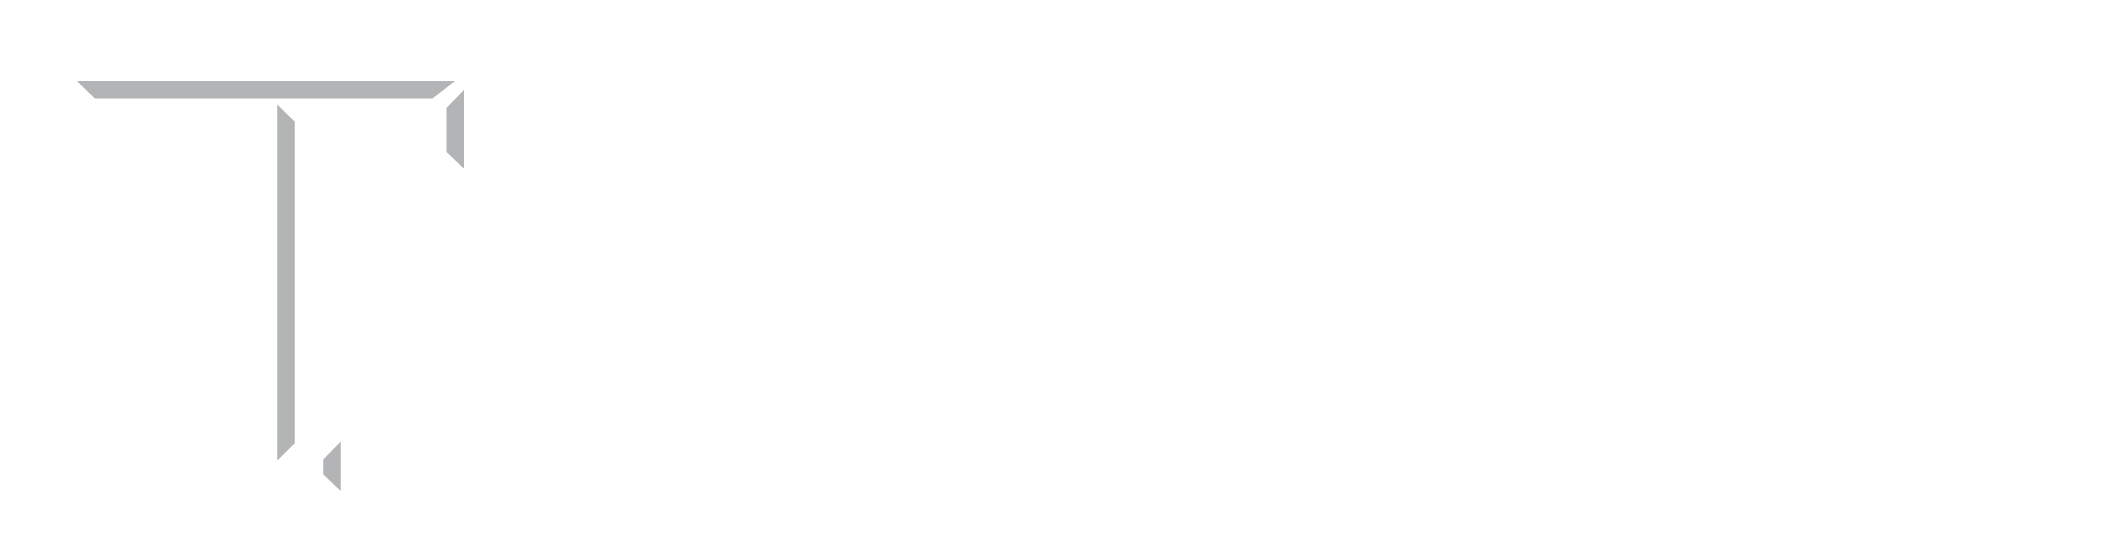 Texas A and M University College of Liberal Arts Logo